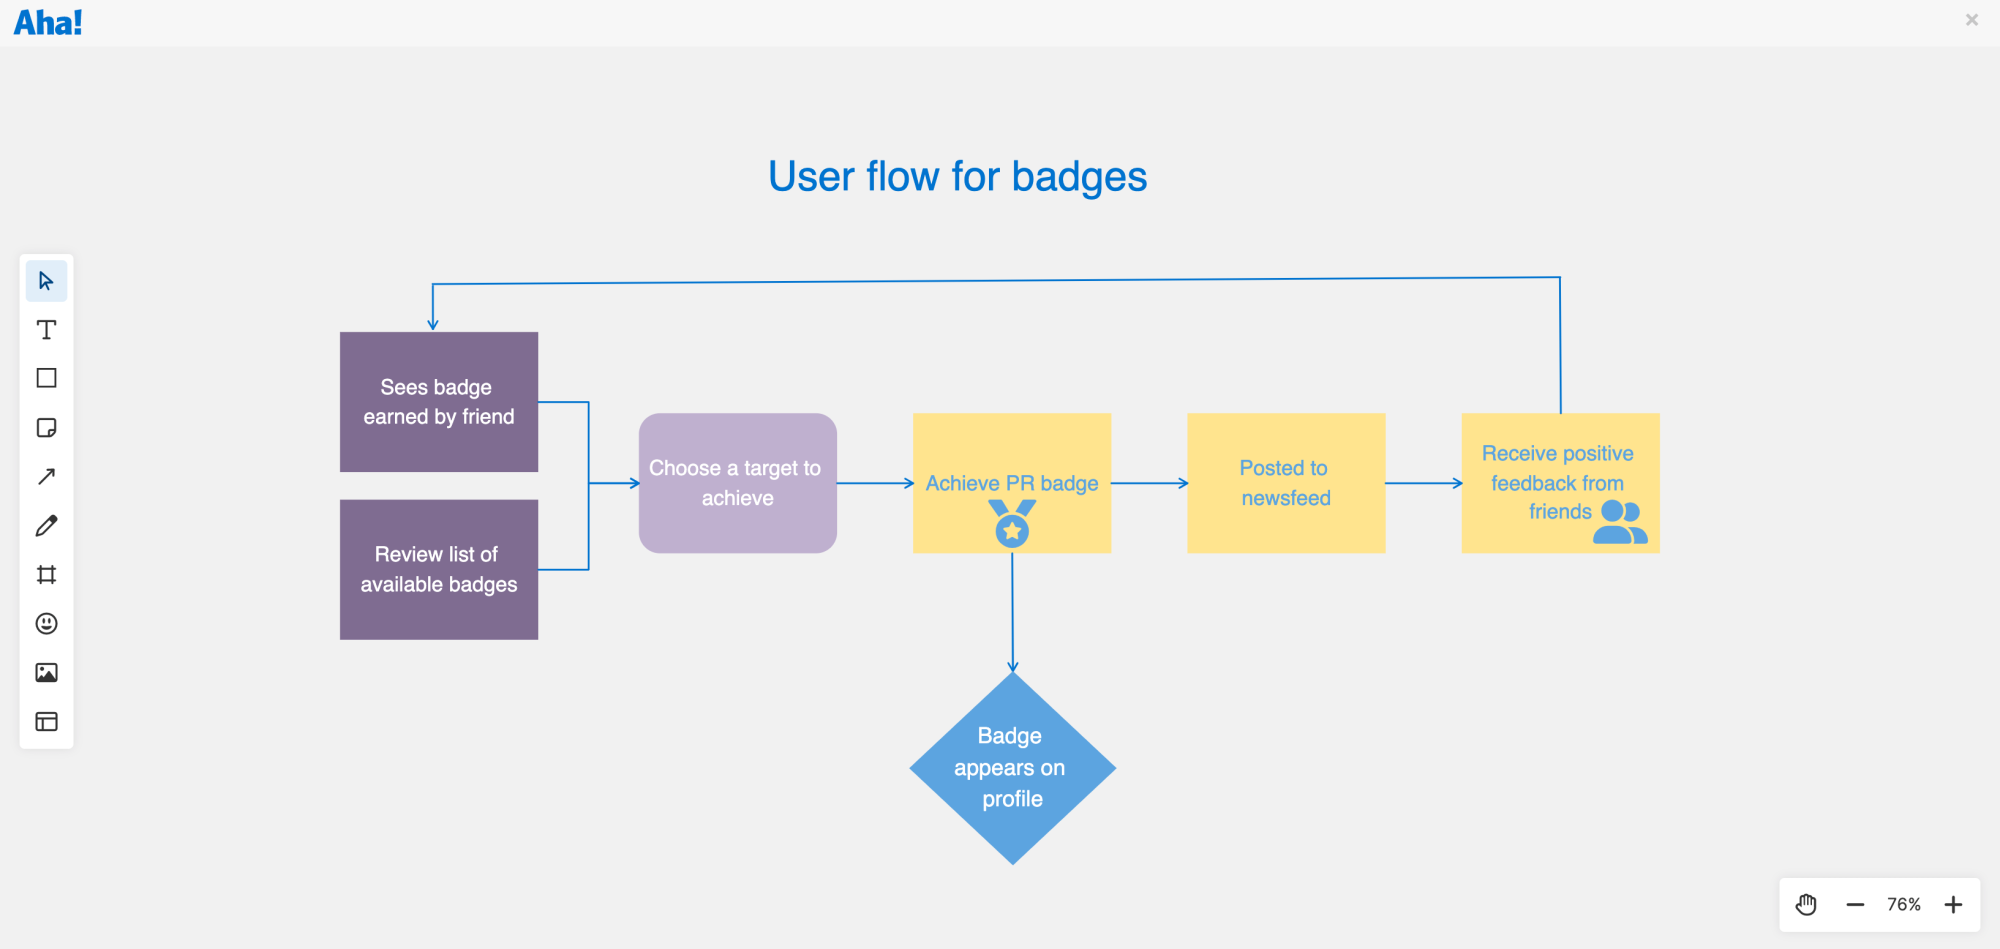 A simple user flow diagram created with an Aha! whiteboard